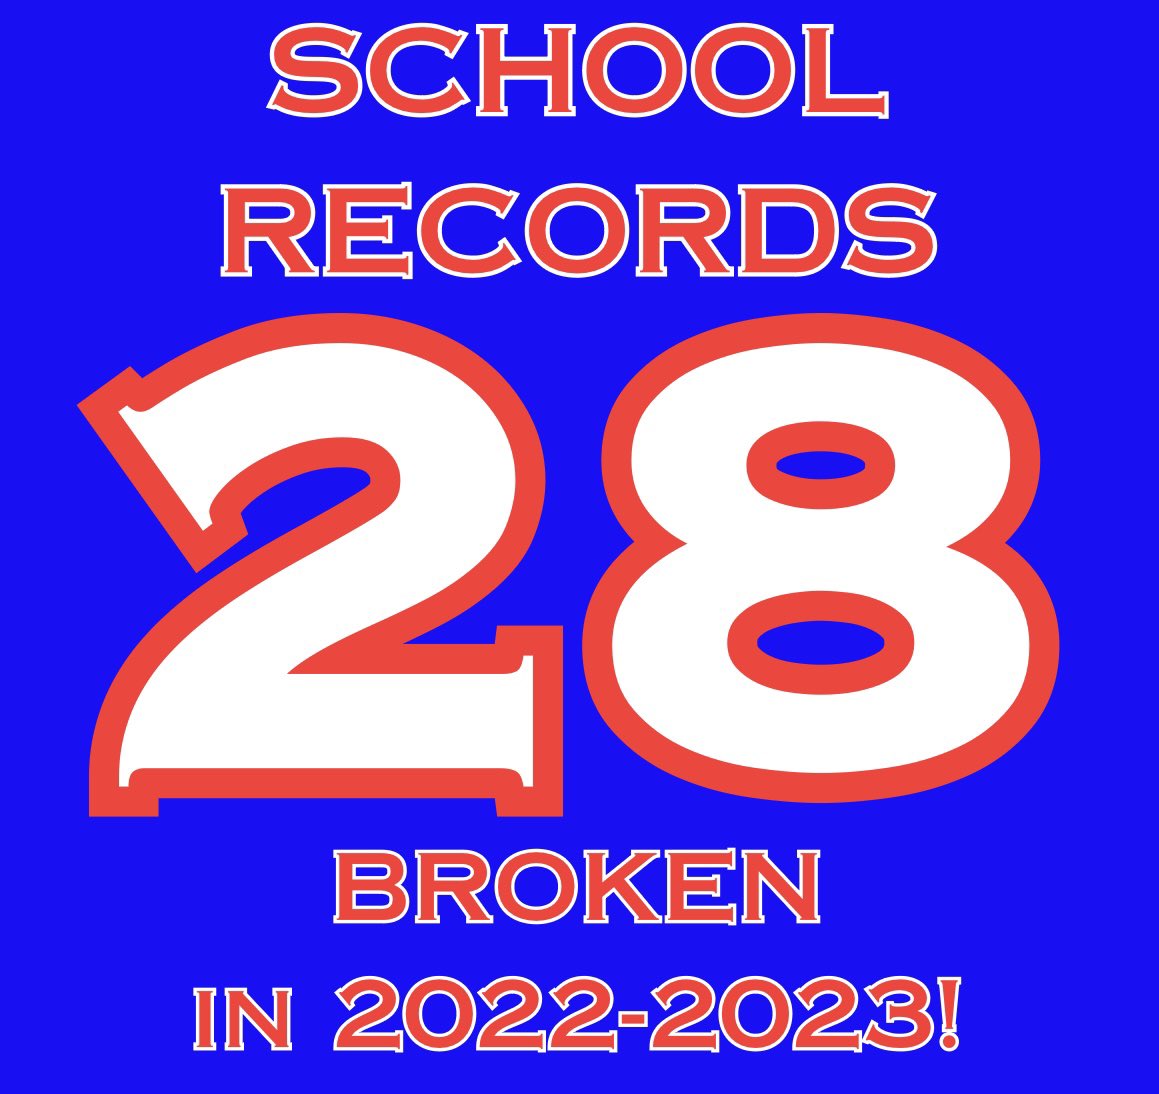 With Claire Nowels’ new record in the 3200m, Trojan athletes have now broken a total of 28 school records this school year across all athletic programs! ⚔️🙌 @CHSAA @RobNamnoum @DanMohrmann @gazettepreps @FFC8schools @FfchsB @lukezahlmann @gazettepreps @coloradopreps